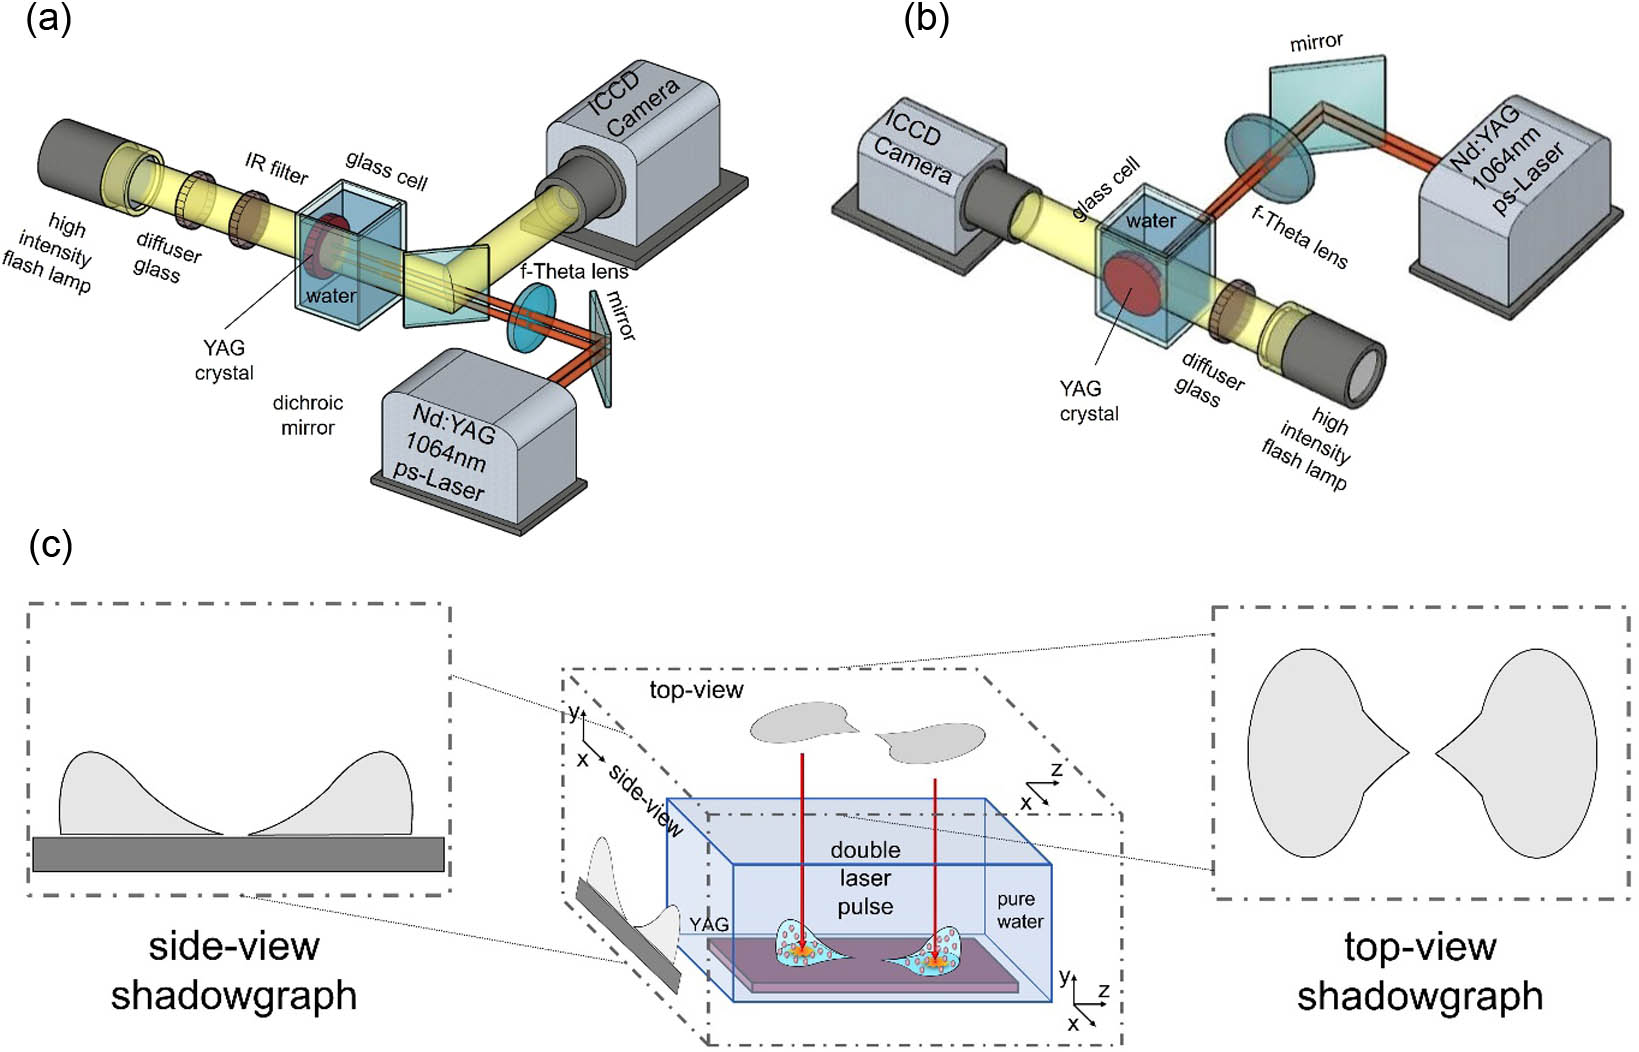 Schematic diagram of coaxial diffuse shadowgraphy system: (a) for top-view angle; (b) for side-view angle. By placing a dichroic mirror at 45° in front of the glass cell, picosecond laser pulses can pass through, ablate the YAG target, and generate cavitation bubbles. The mirror also reflects the visible flashlight into the camera lens, capturing shadowgraph images from the top-view. (c) Schematic of the side- and top-view imaging geometry and related two-dimensional shadowgraph projections.